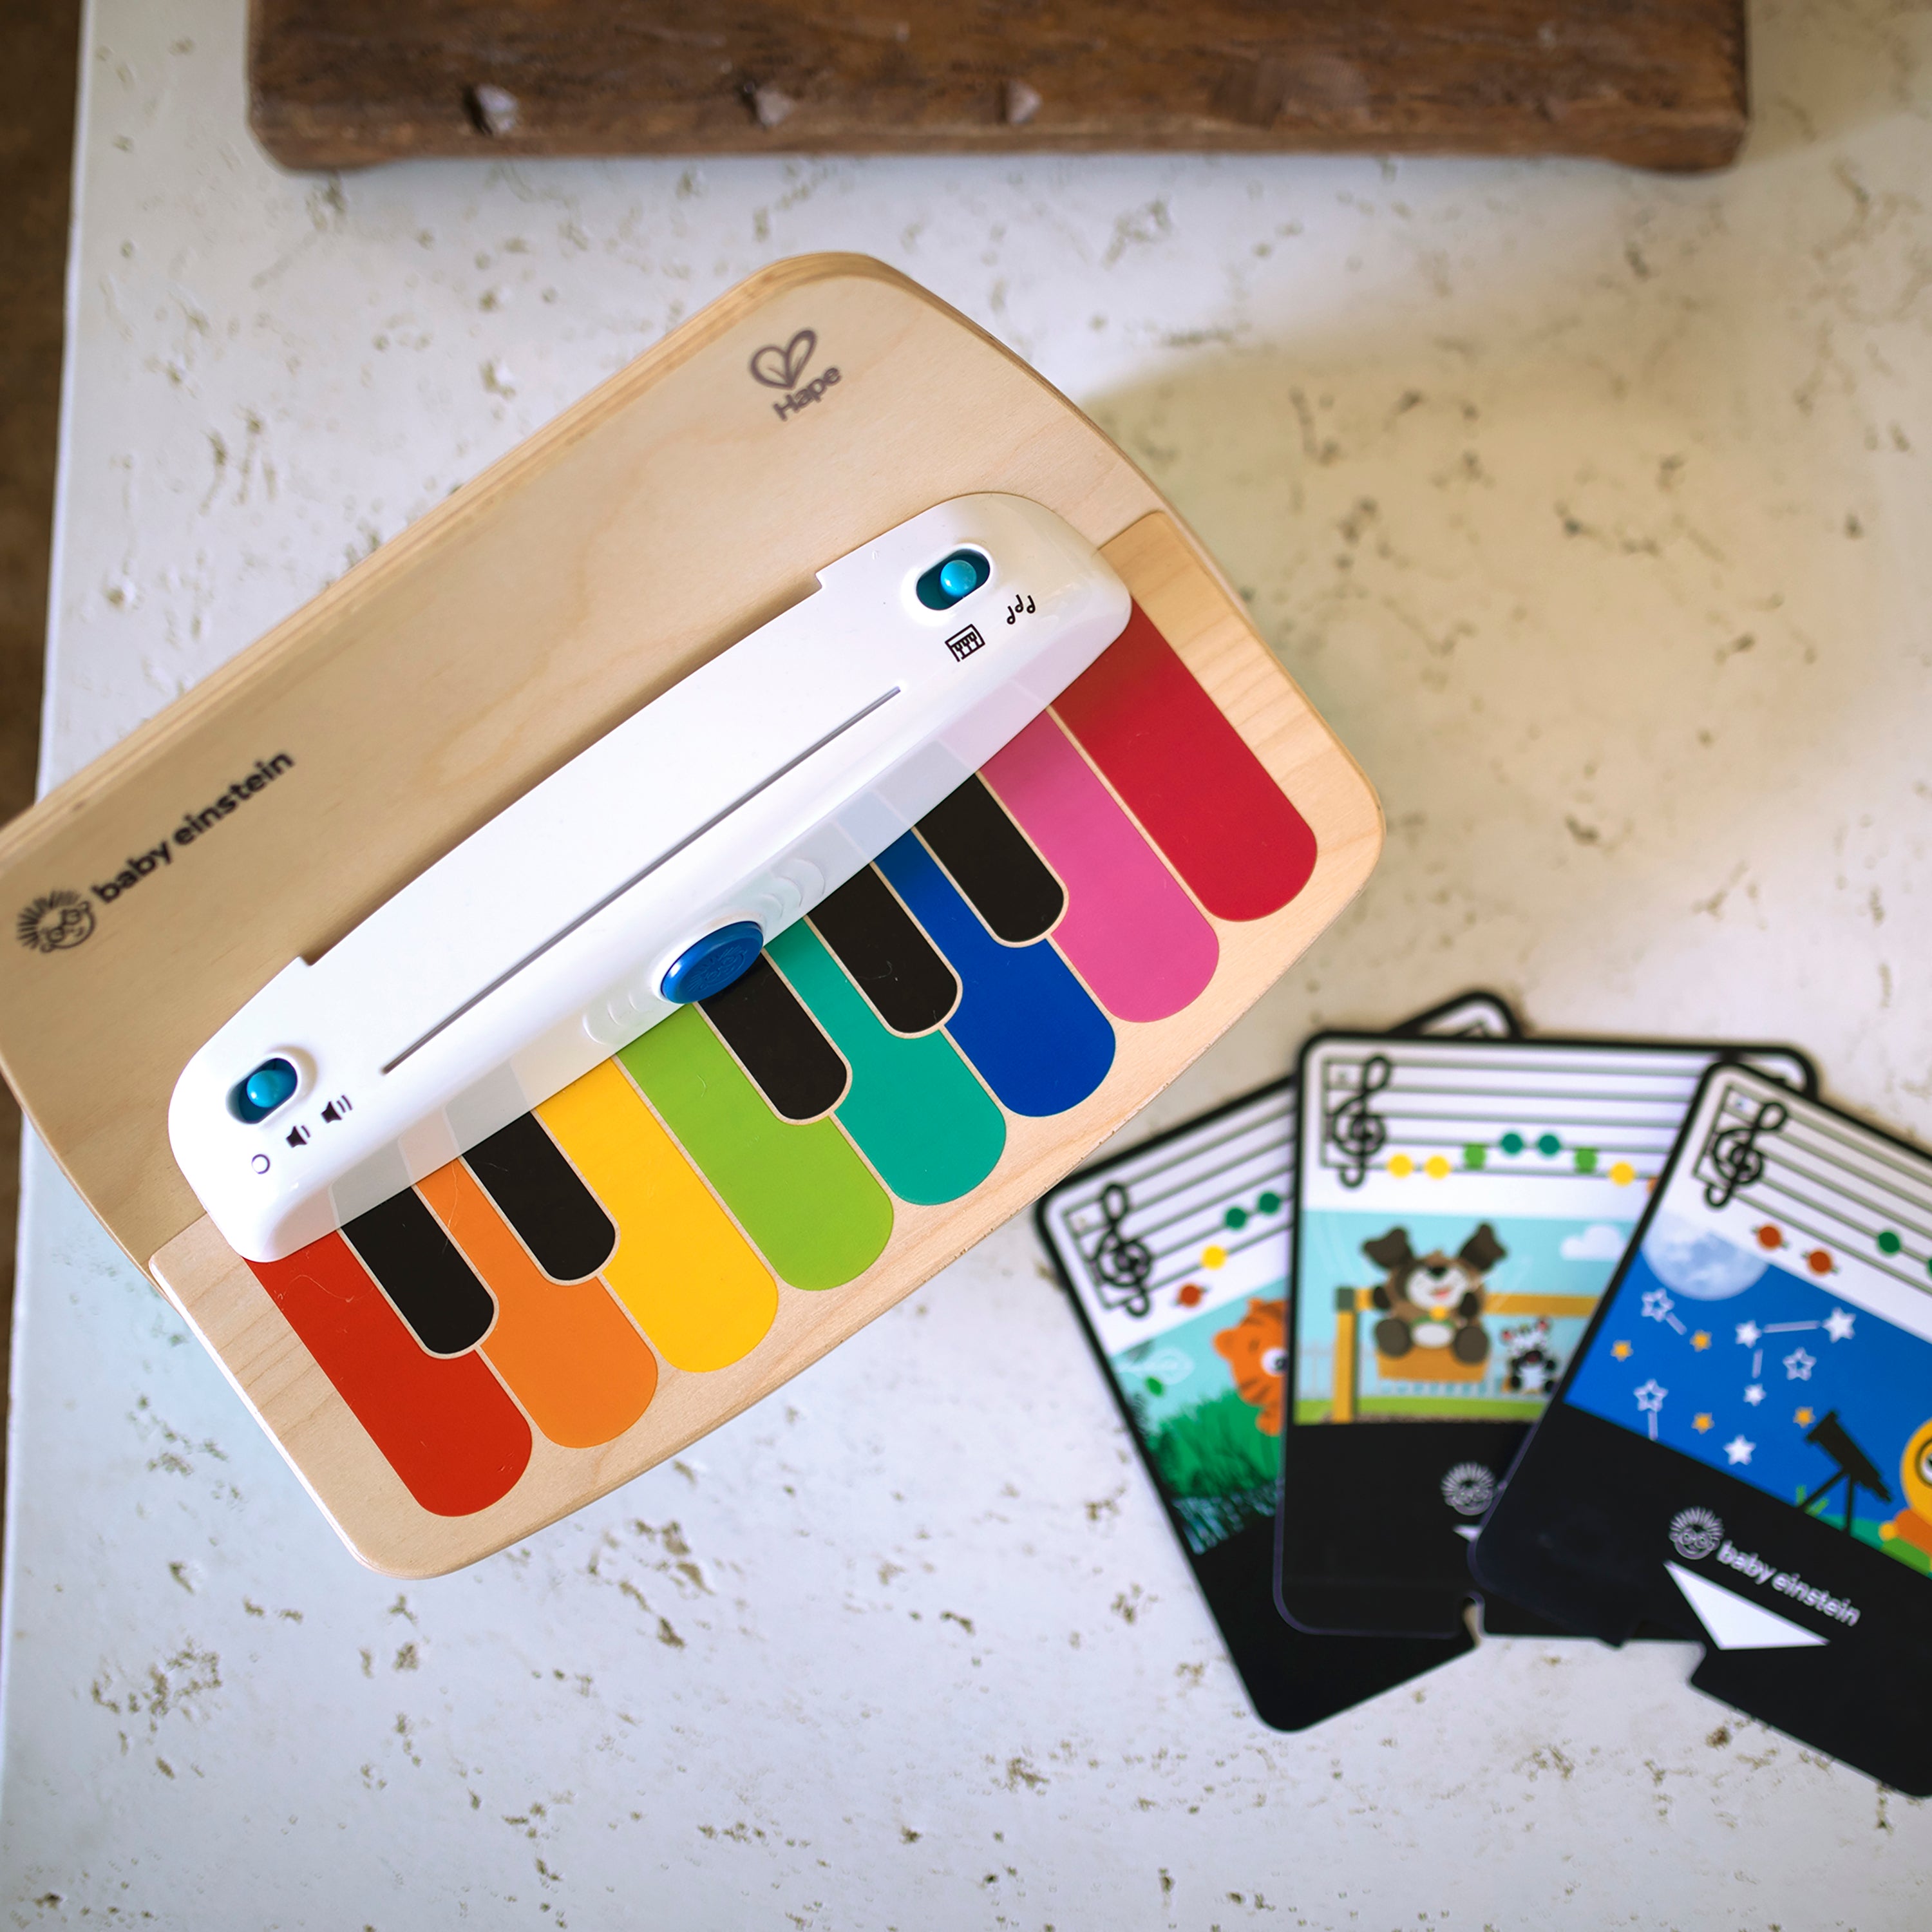 Magic Touch Piano Musical Toy